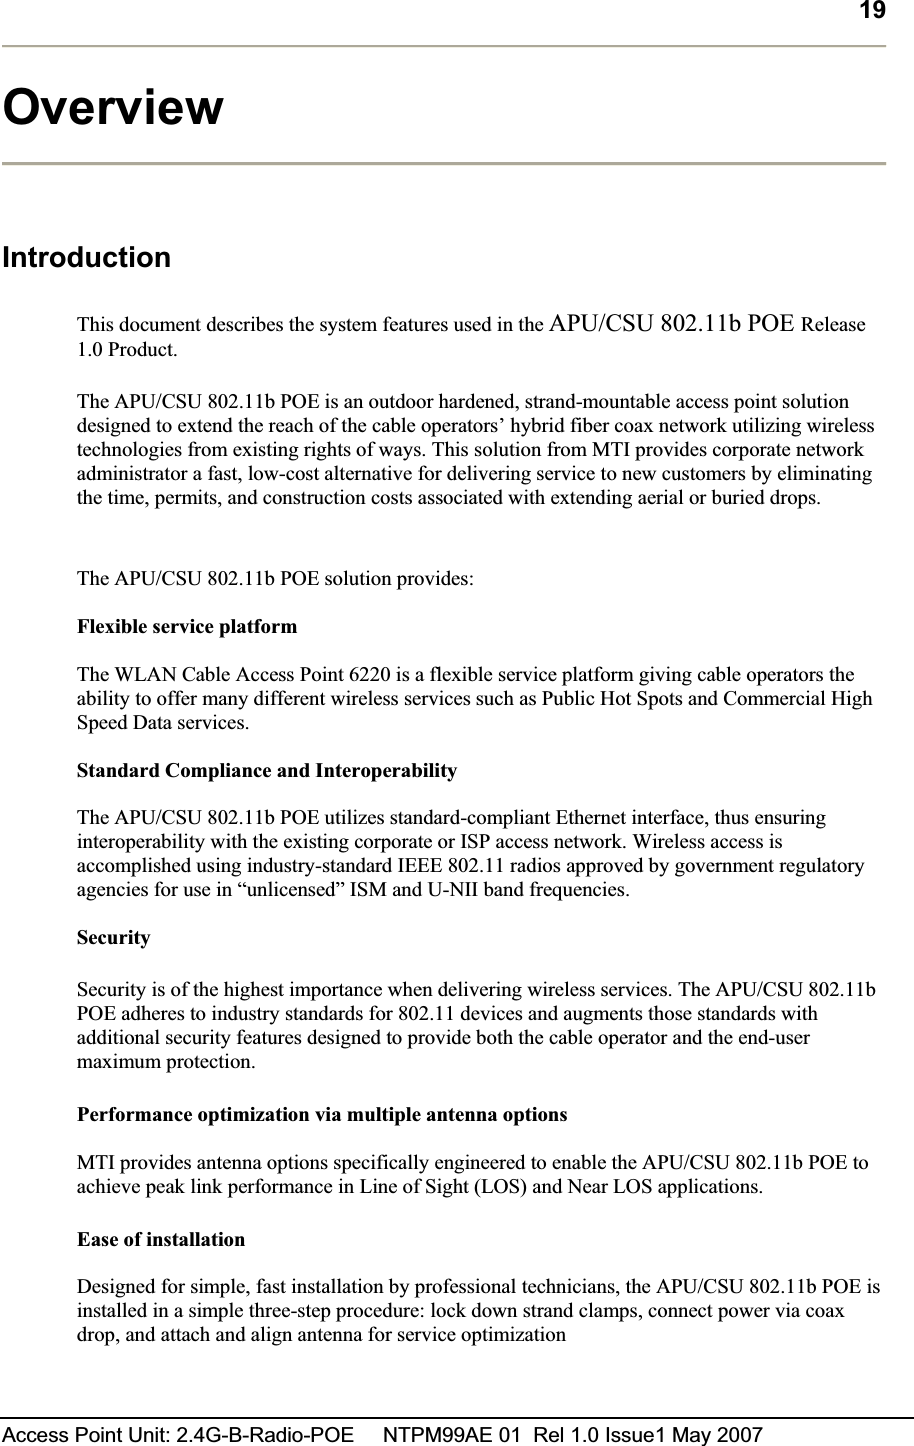 19Access Point Unit: 2.4G-B-Radio-POE     NTPM99AE 01  Rel 1.0 Issue1 May 2007 OverviewIntroduction This document describes the system features used in the APU/CSU 802.11b POE Release1.0 Product. The APU/CSU 802.11b POE is an outdoor hardened, strand-mountable access point solution designed to extend the reach of the cable operators’ hybrid fiber coax network utilizing wireless technologies from existing rights of ways. This solution from MTI provides corporate network administrator a fast, low-cost alternative for delivering service to new customers by eliminating the time, permits, and construction costs associated with extending aerial or buried drops. The APU/CSU 802.11b POE solution provides: Flexible service platform The WLAN Cable Access Point 6220 is a flexible service platform giving cable operators the ability to offer many different wireless services such as Public Hot Spots and Commercial High Speed Data services. Standard Compliance and Interoperability The APU/CSU 802.11b POE utilizes standard-compliant Ethernet interface, thus ensuring interoperability with the existing corporate or ISP access network. Wireless access is accomplished using industry-standard IEEE 802.11 radios approved by government regulatory agencies for use in “unlicensed” ISM and U-NII band frequencies. SecuritySecurity is of the highest importance when delivering wireless services. The APU/CSU 802.11b POE adheres to industry standards for 802.11 devices and augments those standards with additional security features designed to provide both the cable operator and the end-user maximum protection. Performance optimization via multiple antenna options MTI provides antenna options specifically engineered to enable the APU/CSU 802.11b POE to achieve peak link performance in Line of Sight (LOS) and Near LOS applications.Ease of installation Designed for simple, fast installation by professional technicians, the APU/CSU 802.11b POE is installed in a simple three-step procedure: lock down strand clamps, connect power via coax drop, and attach and align antenna for service optimization 